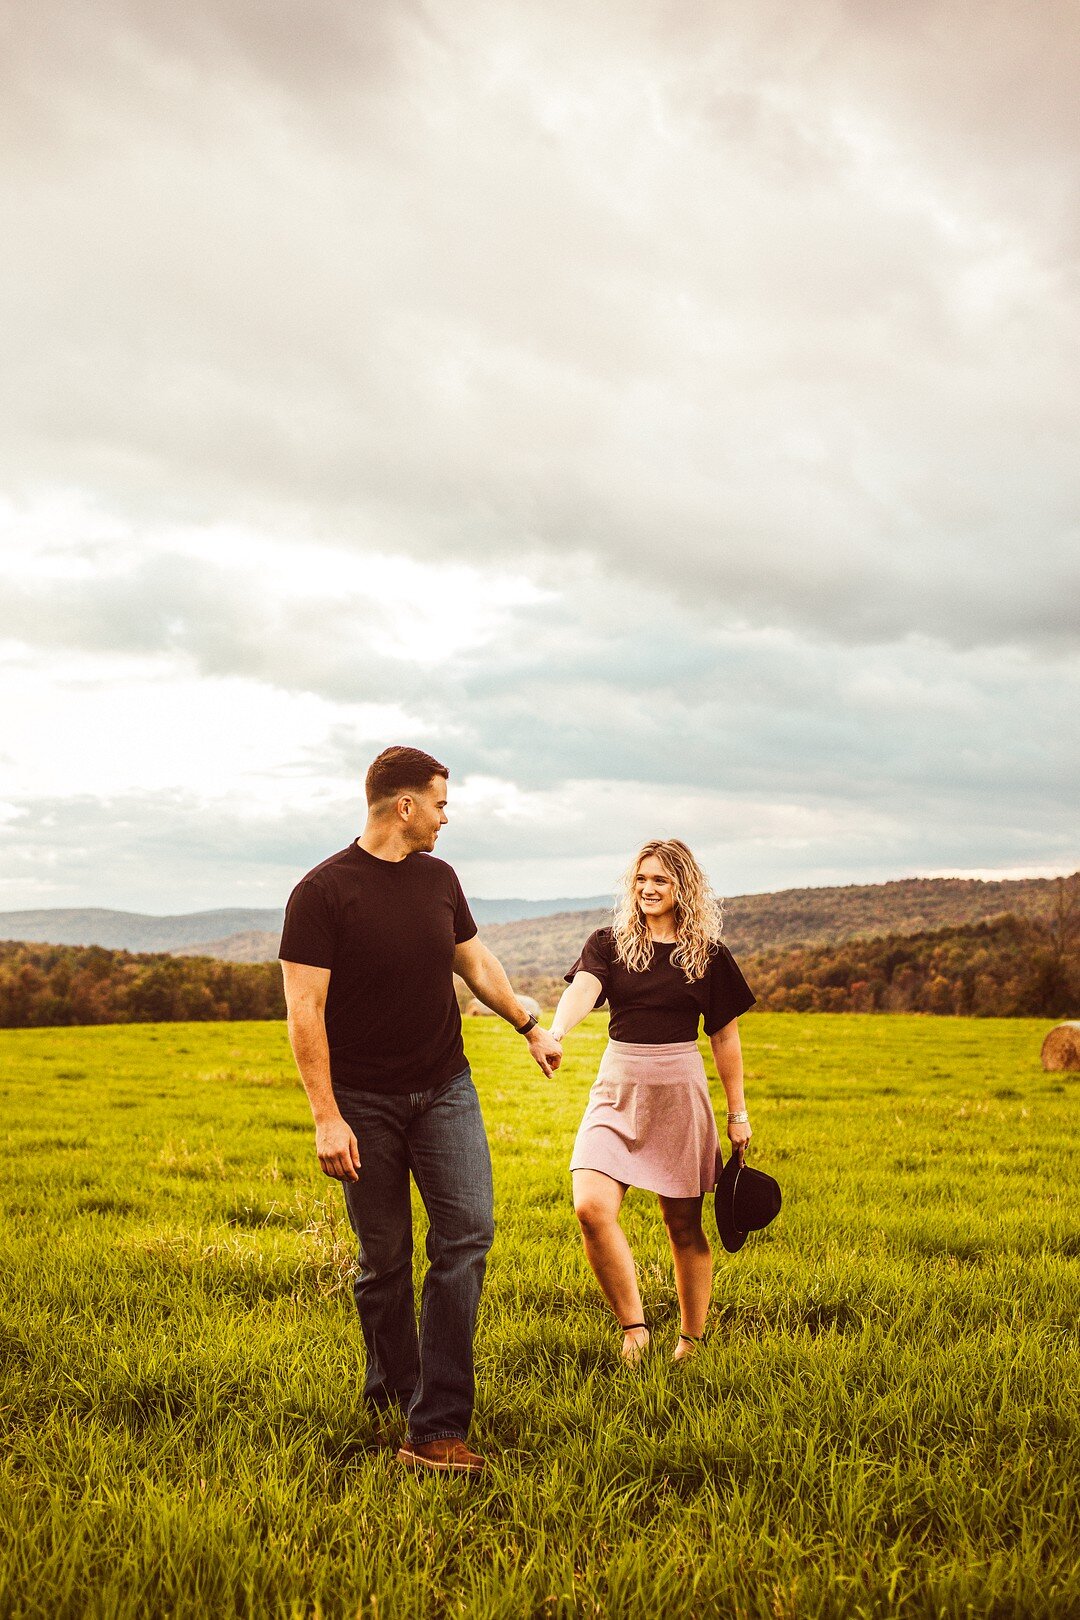 Tara and Tyler's Golden Hour Engagement Session in Rome, PA